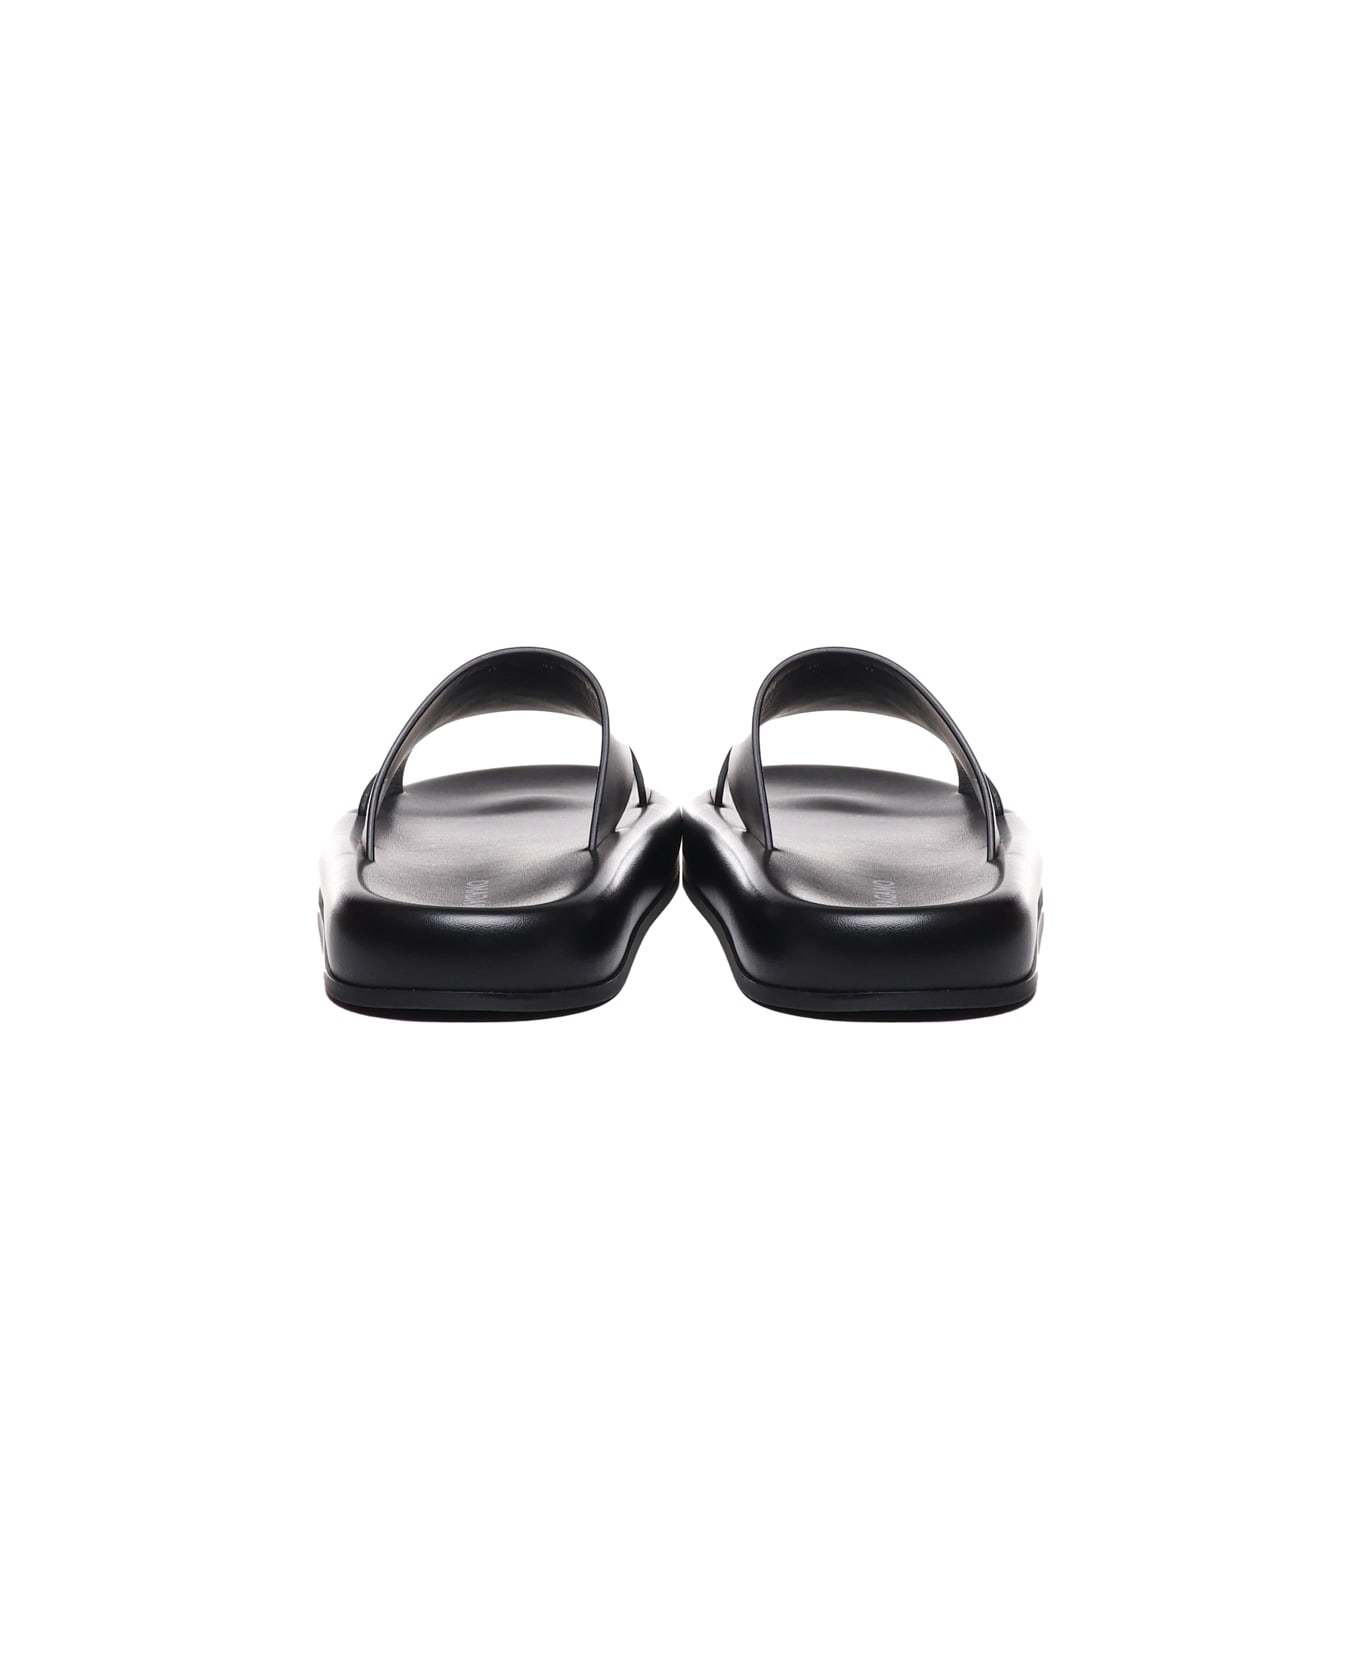 Ferragamo Sandals With Cut-out Detail - Black その他各種シューズ